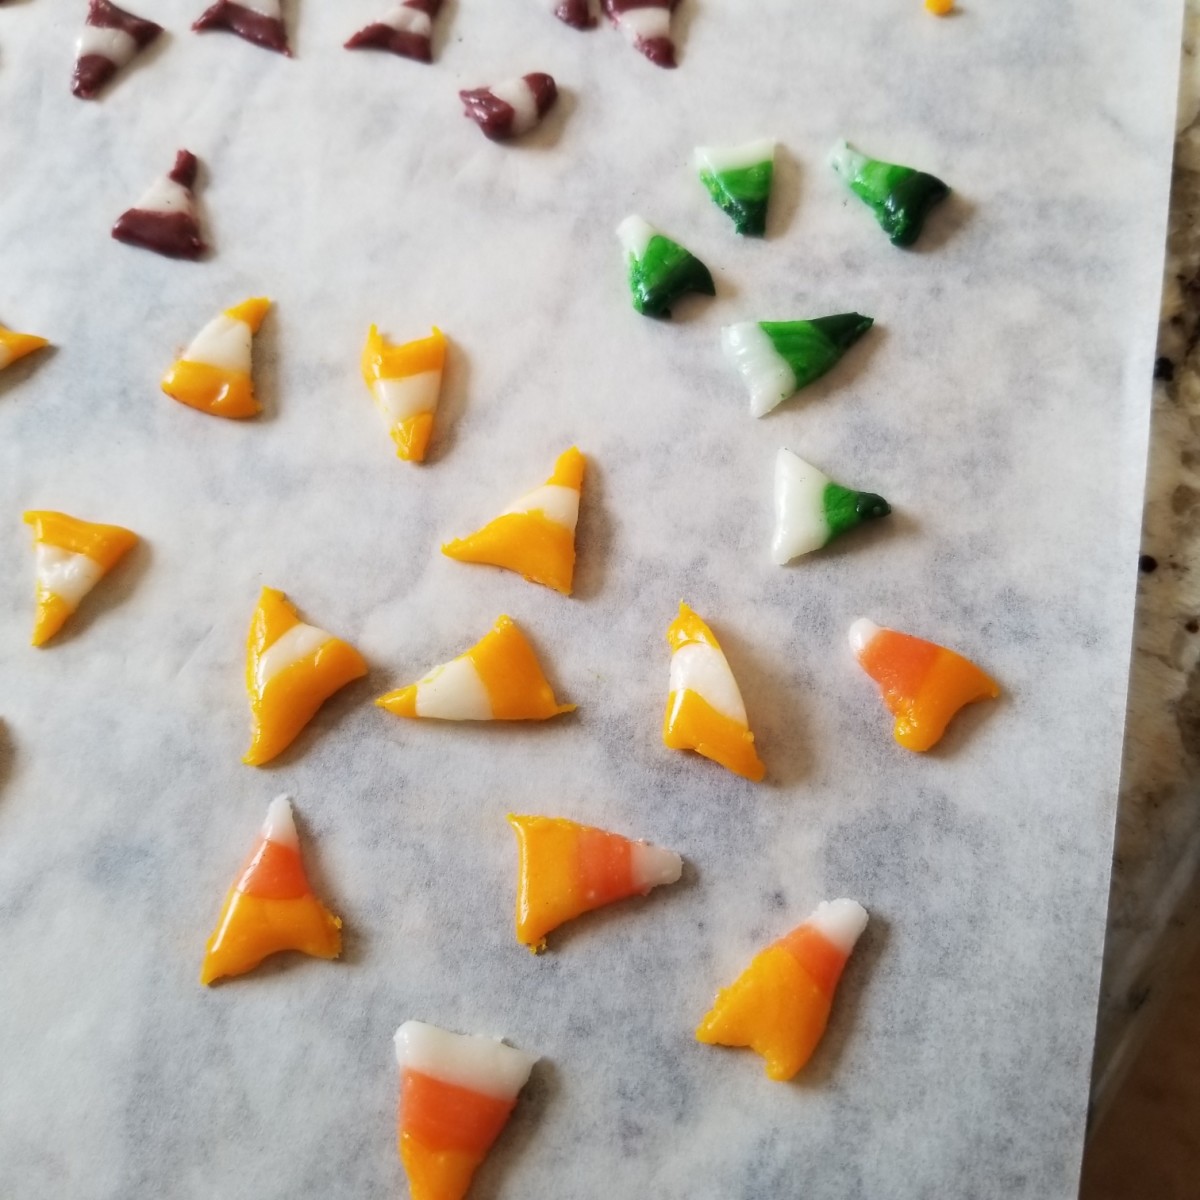 Candy corn can be customized for any occasion by tinting it different colors.